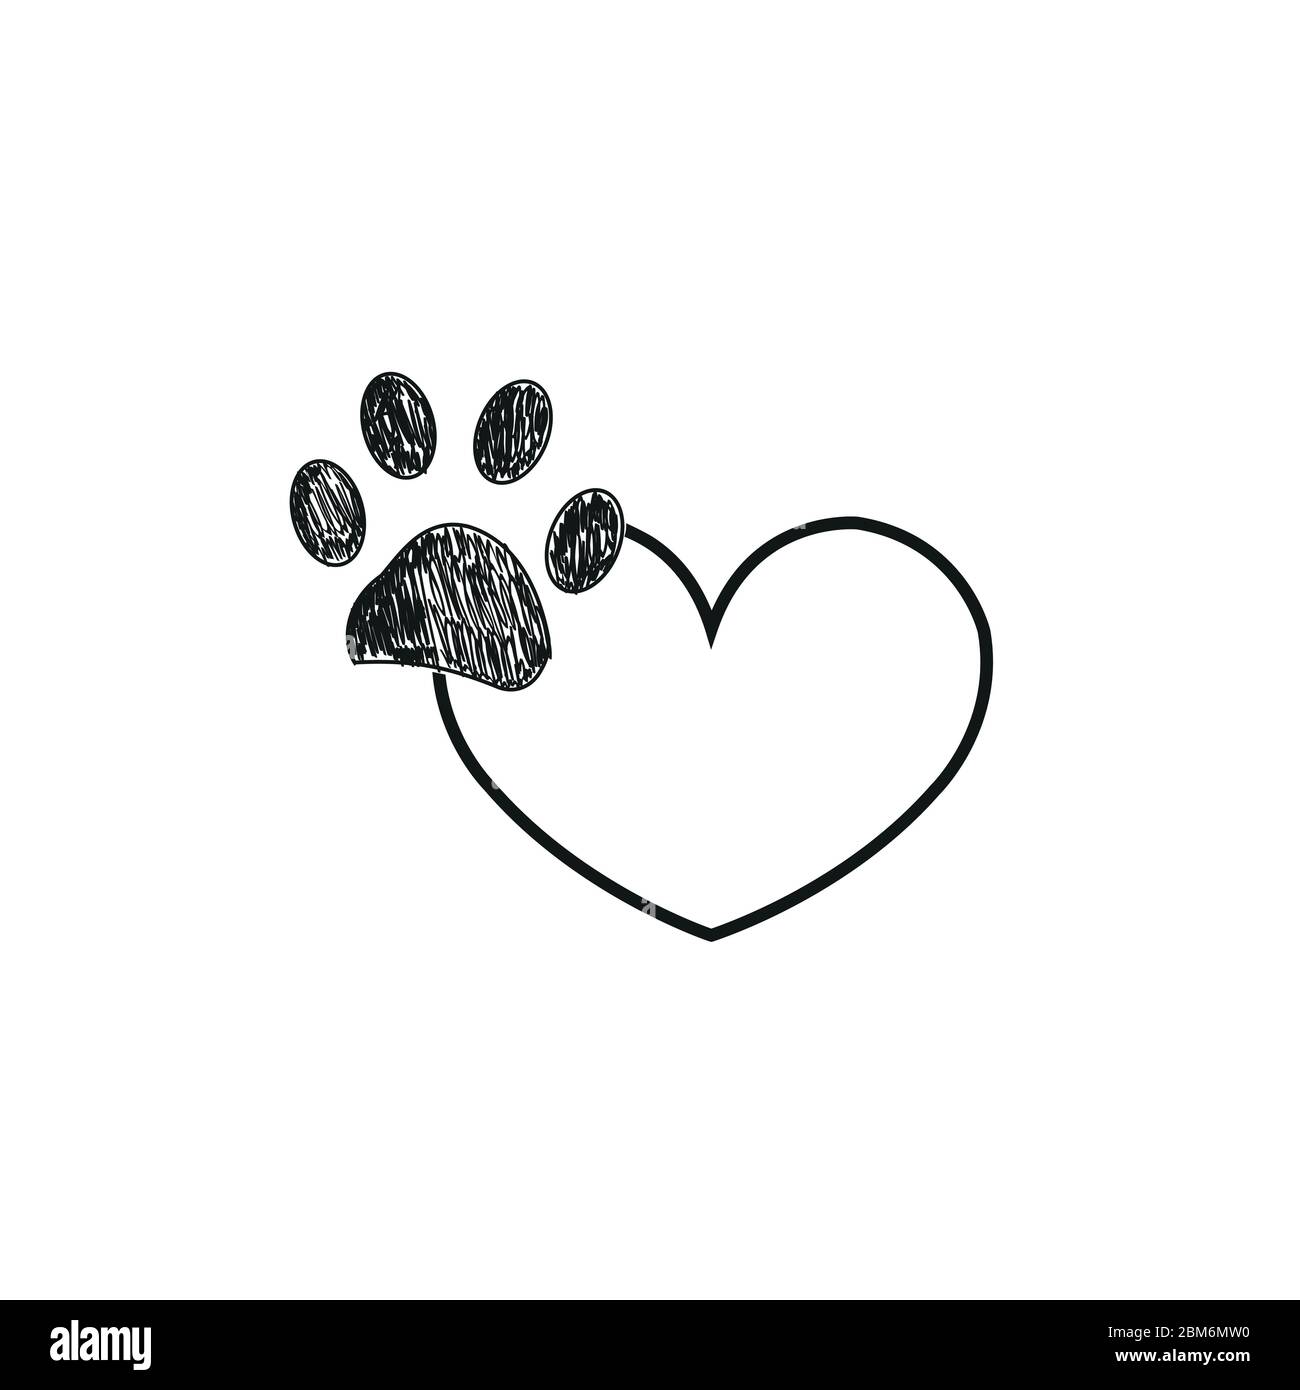 Black heart with doodle paw print tattoo design vector.eps Stock ...